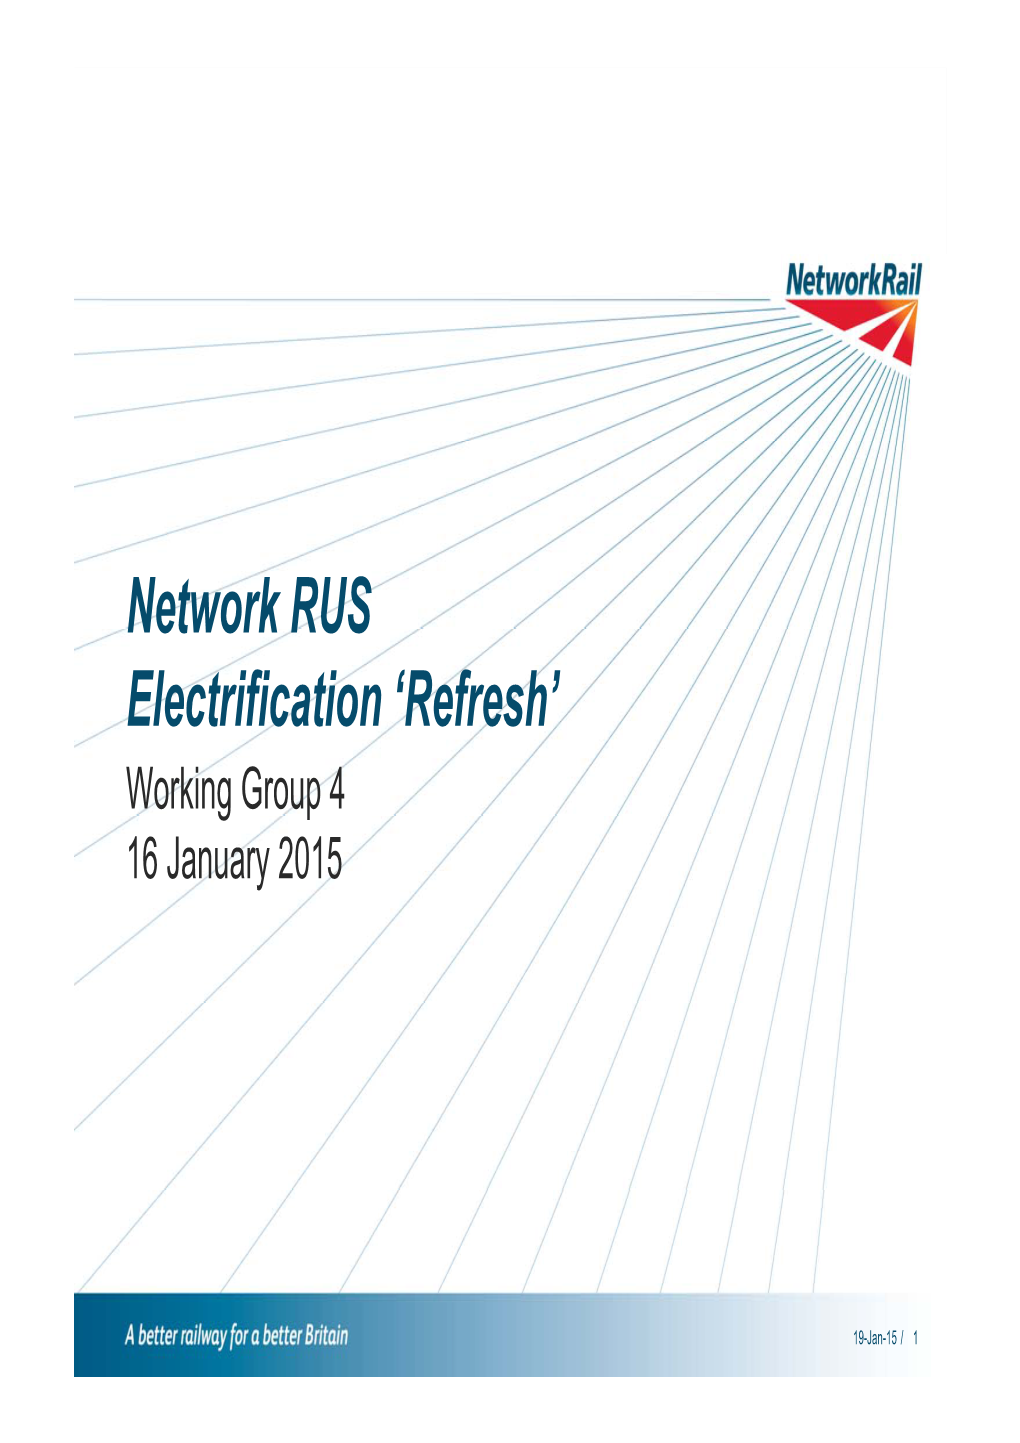 Network RUS Electrification ‘Refresh’ Working Group 4 16 January 2015